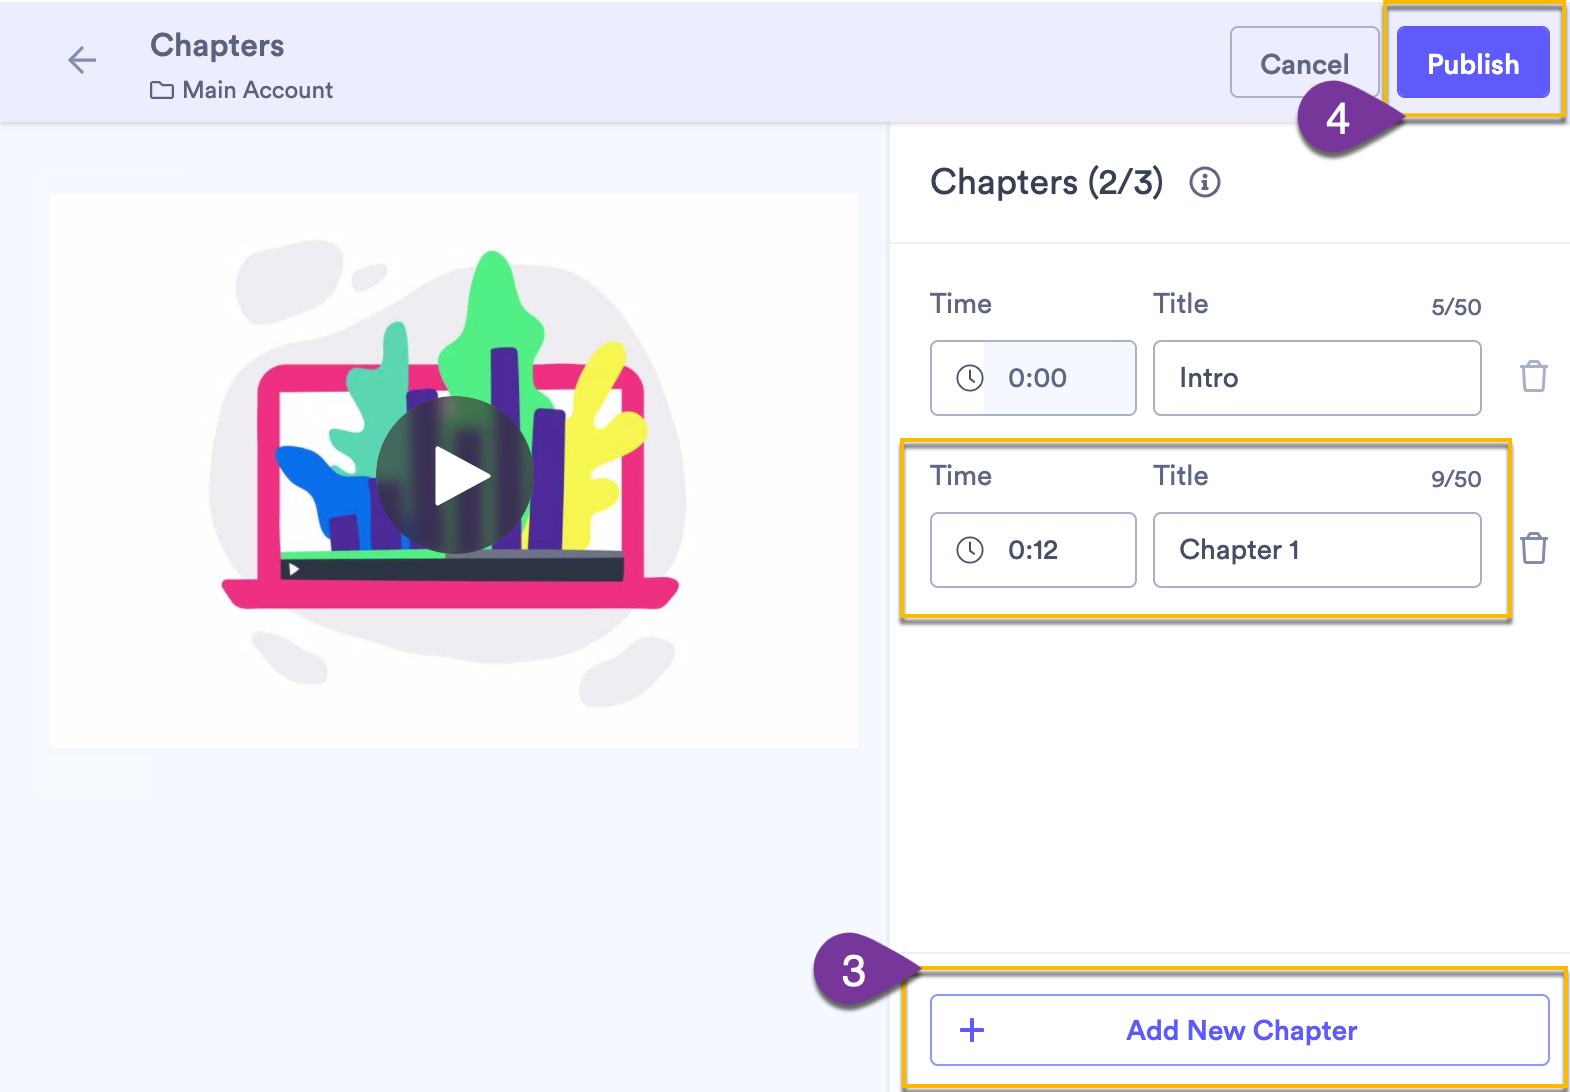 Video chapter edit window showing how to add a new chapter and publish changes